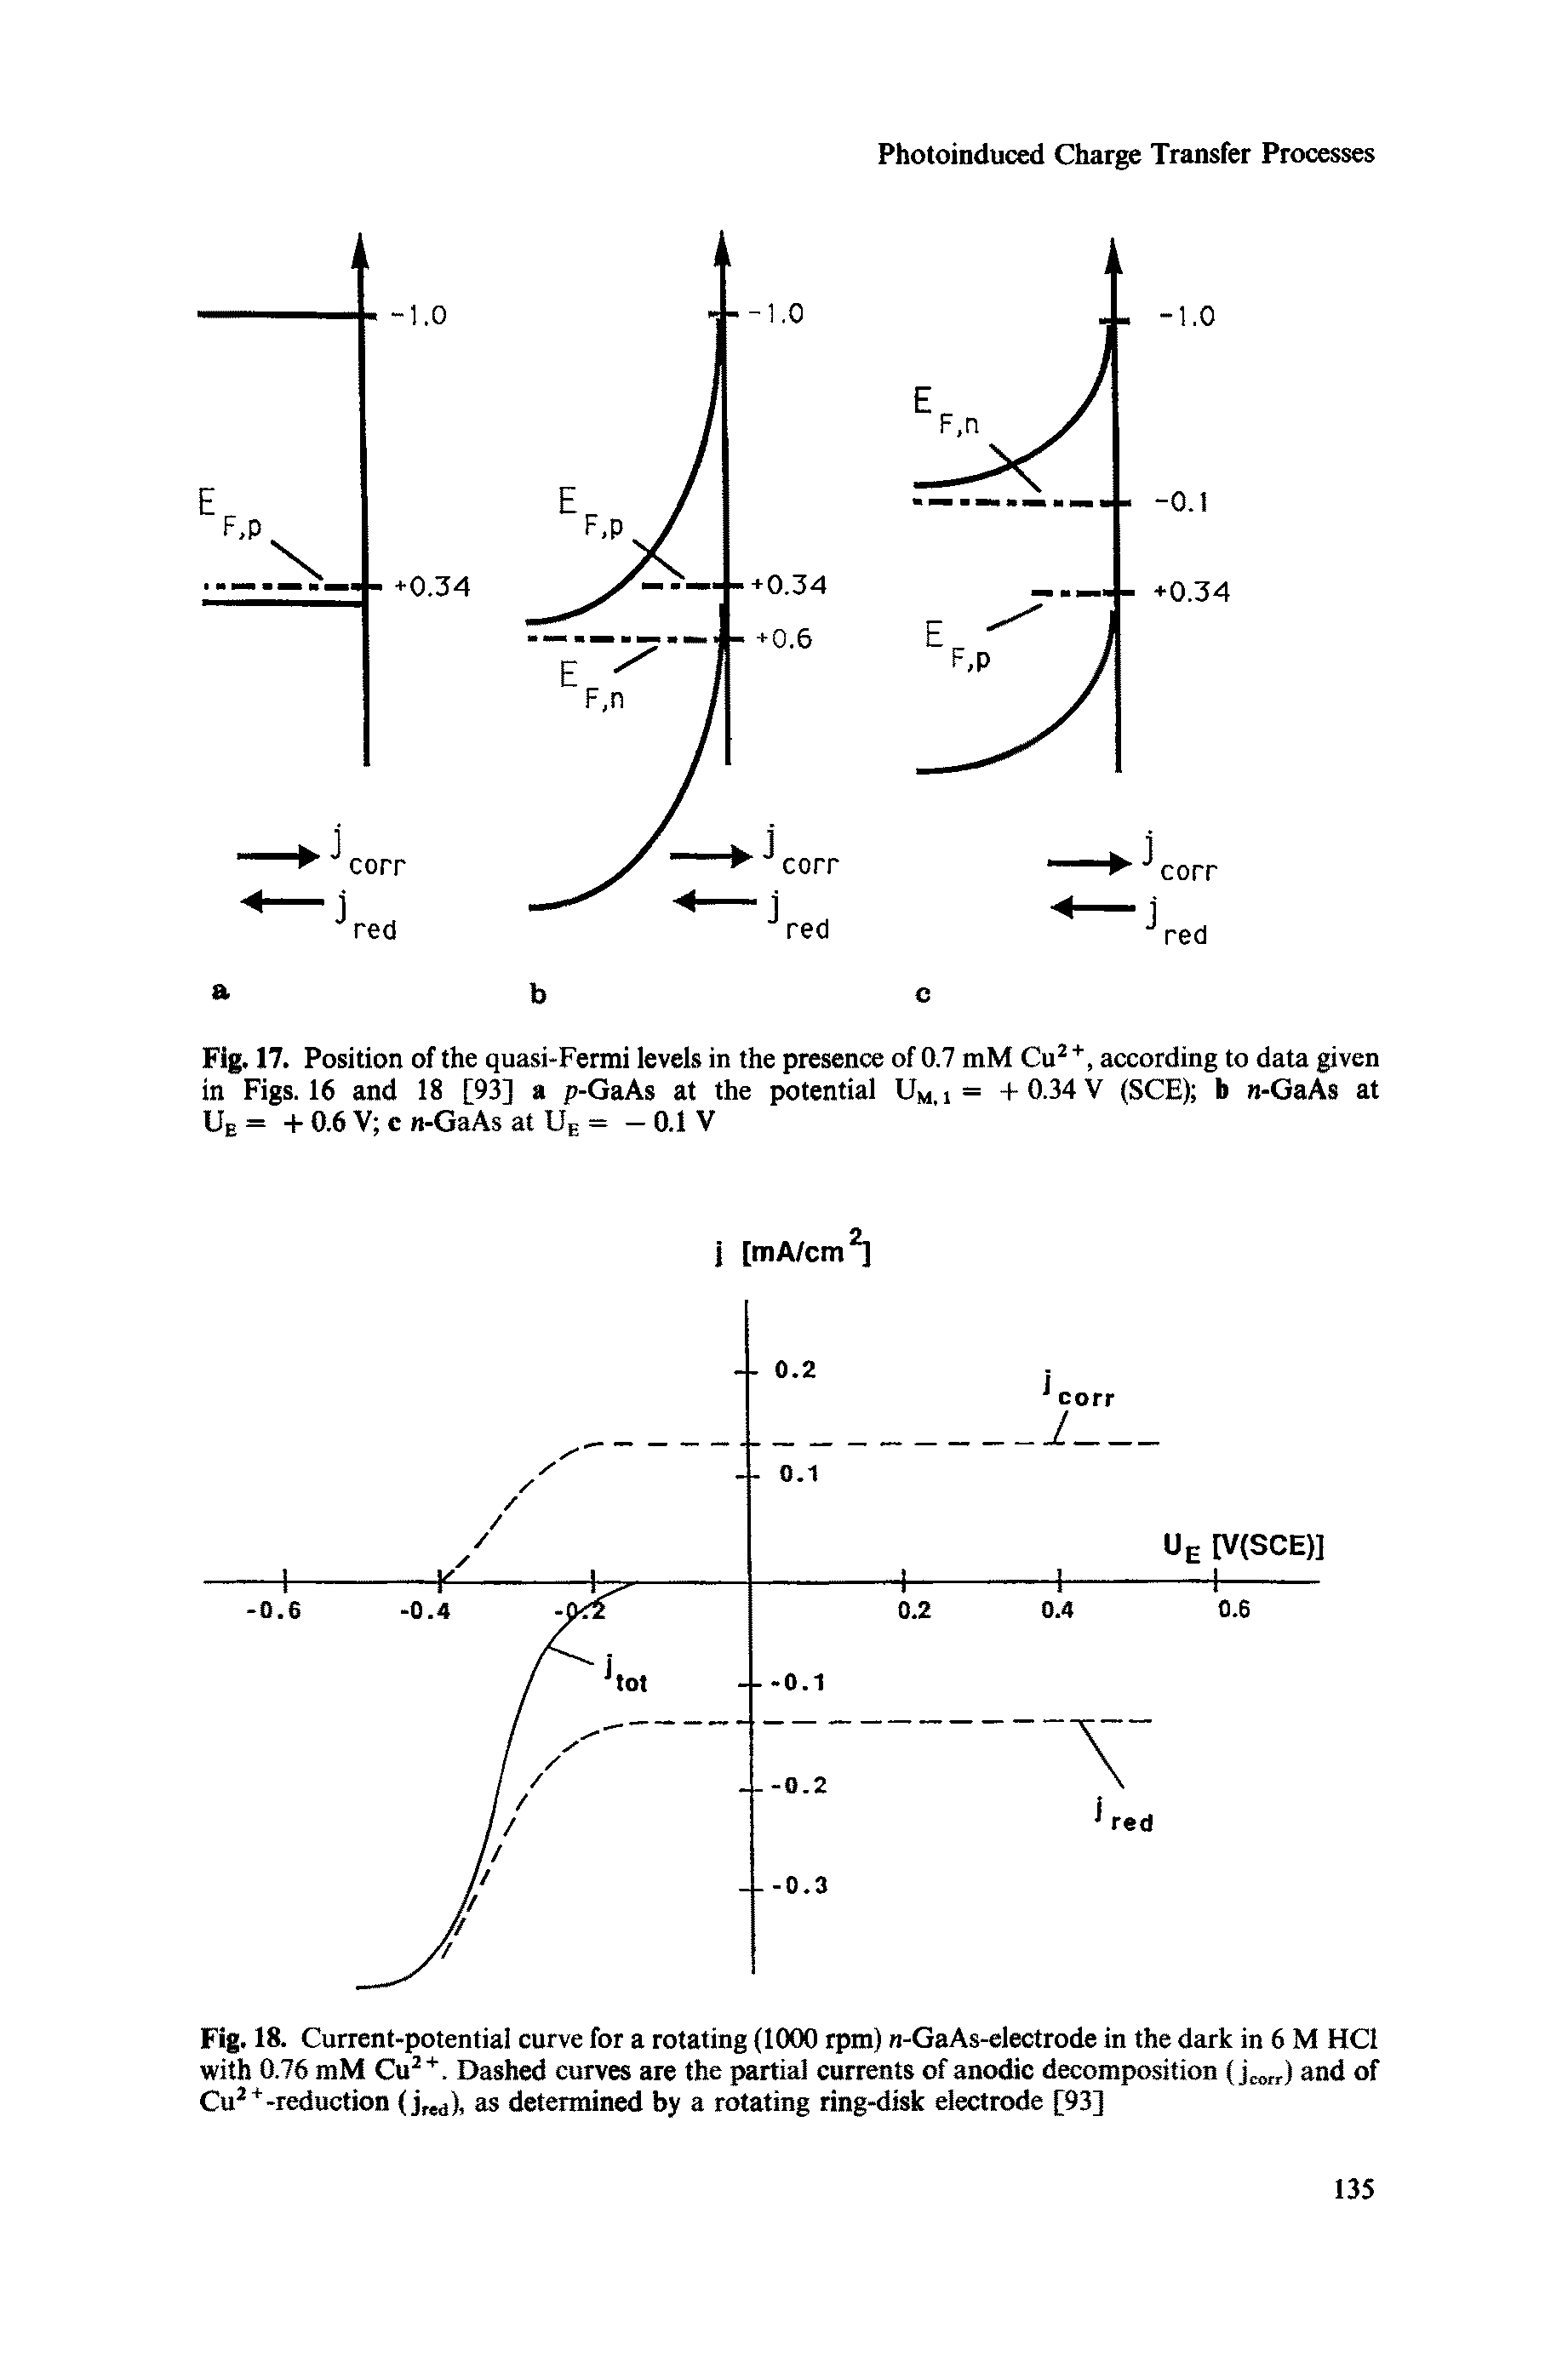 Fig. 18. Current-potential curve for a rotating (1000 rpm) n-GaAs-electrode in the dark in 6 M HCl with 0.76 mM Cu ". Dashed curves are the partial currents of anodic decomposition (] ) and of Cu -reduction (jrea), as determined by a rotating ring-disk electrode [93]...